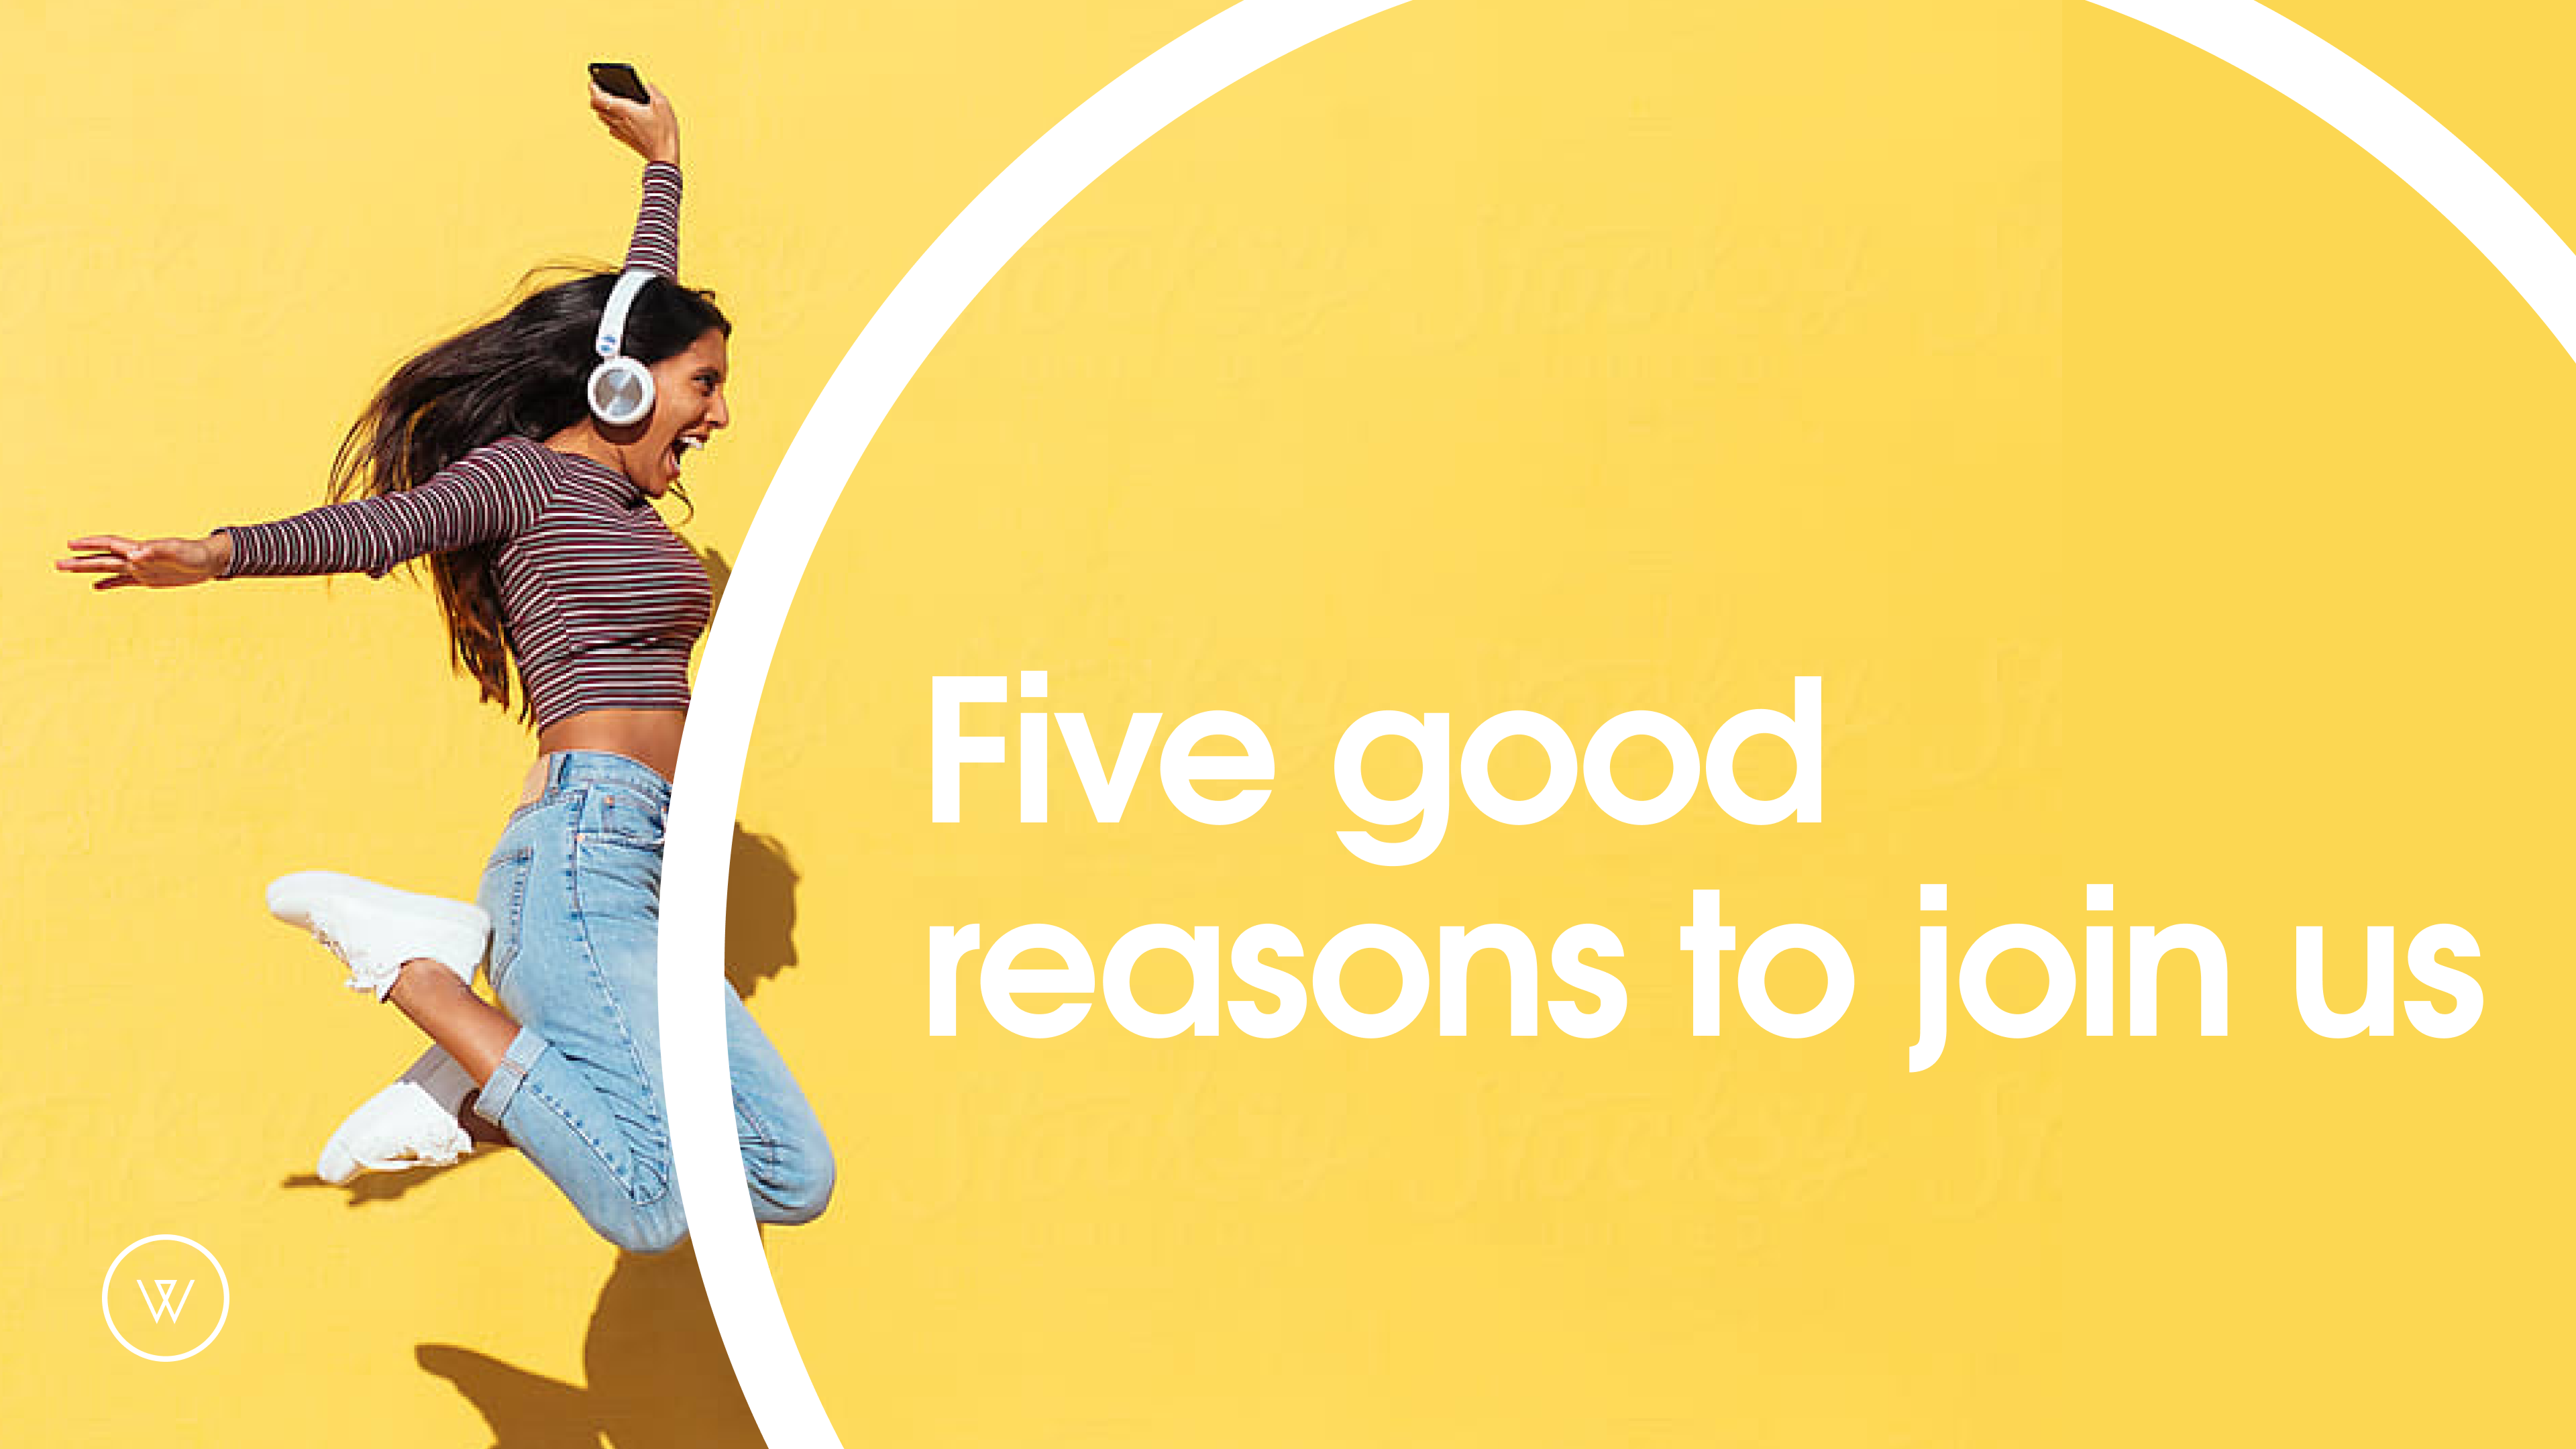 Five good reasons to join us